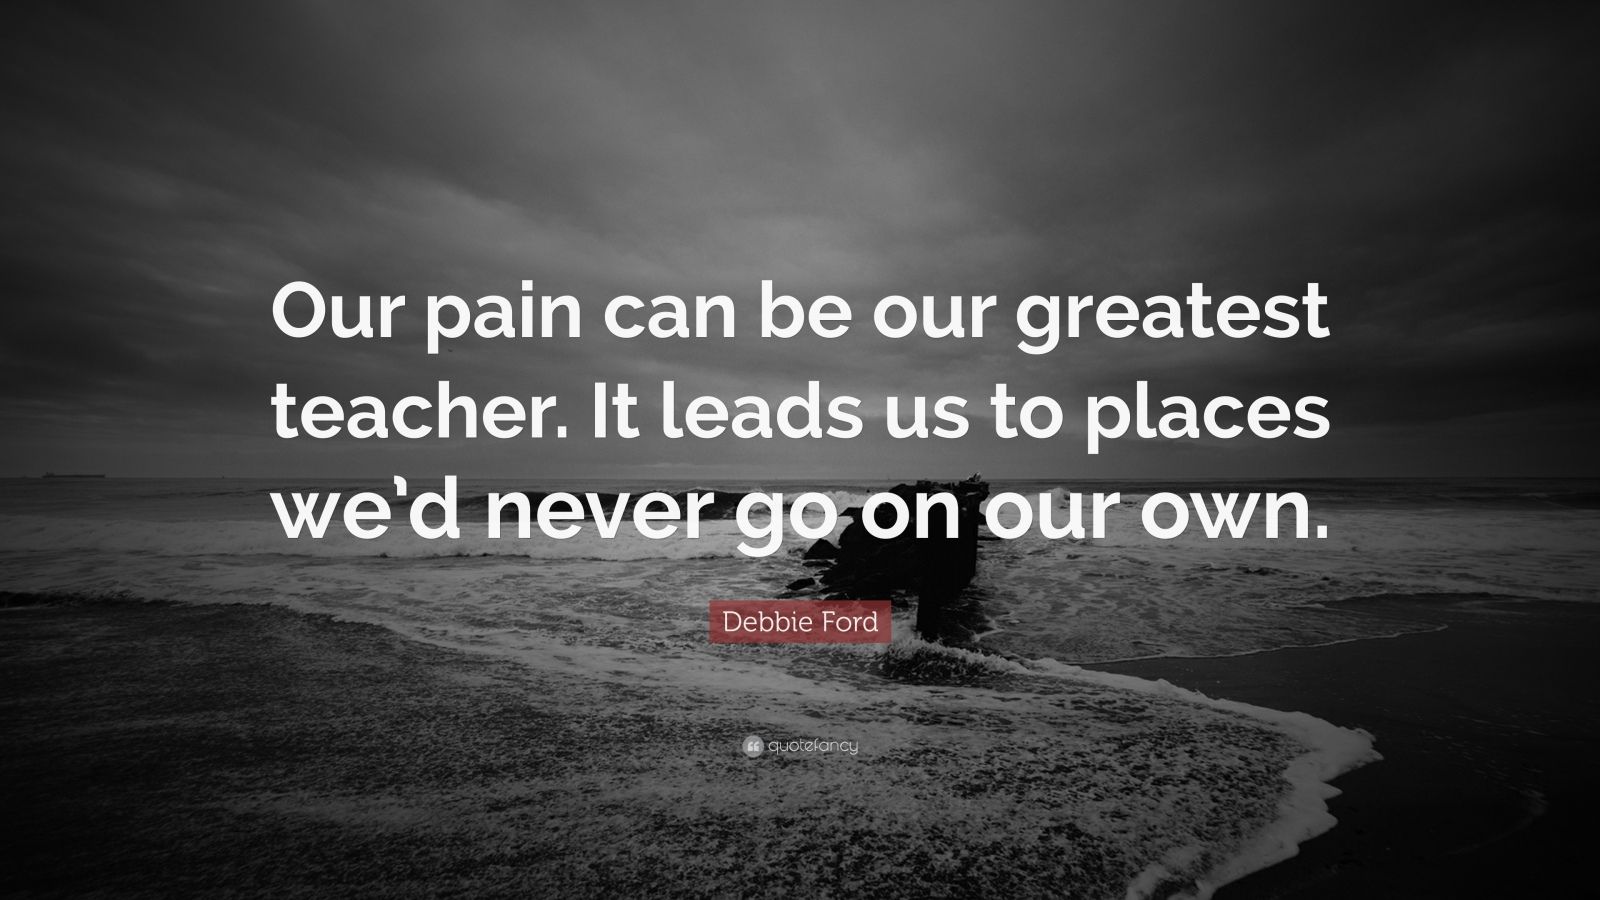 Debbie Ford Quote: “Our pain can be our greatest teacher. It leads us ...